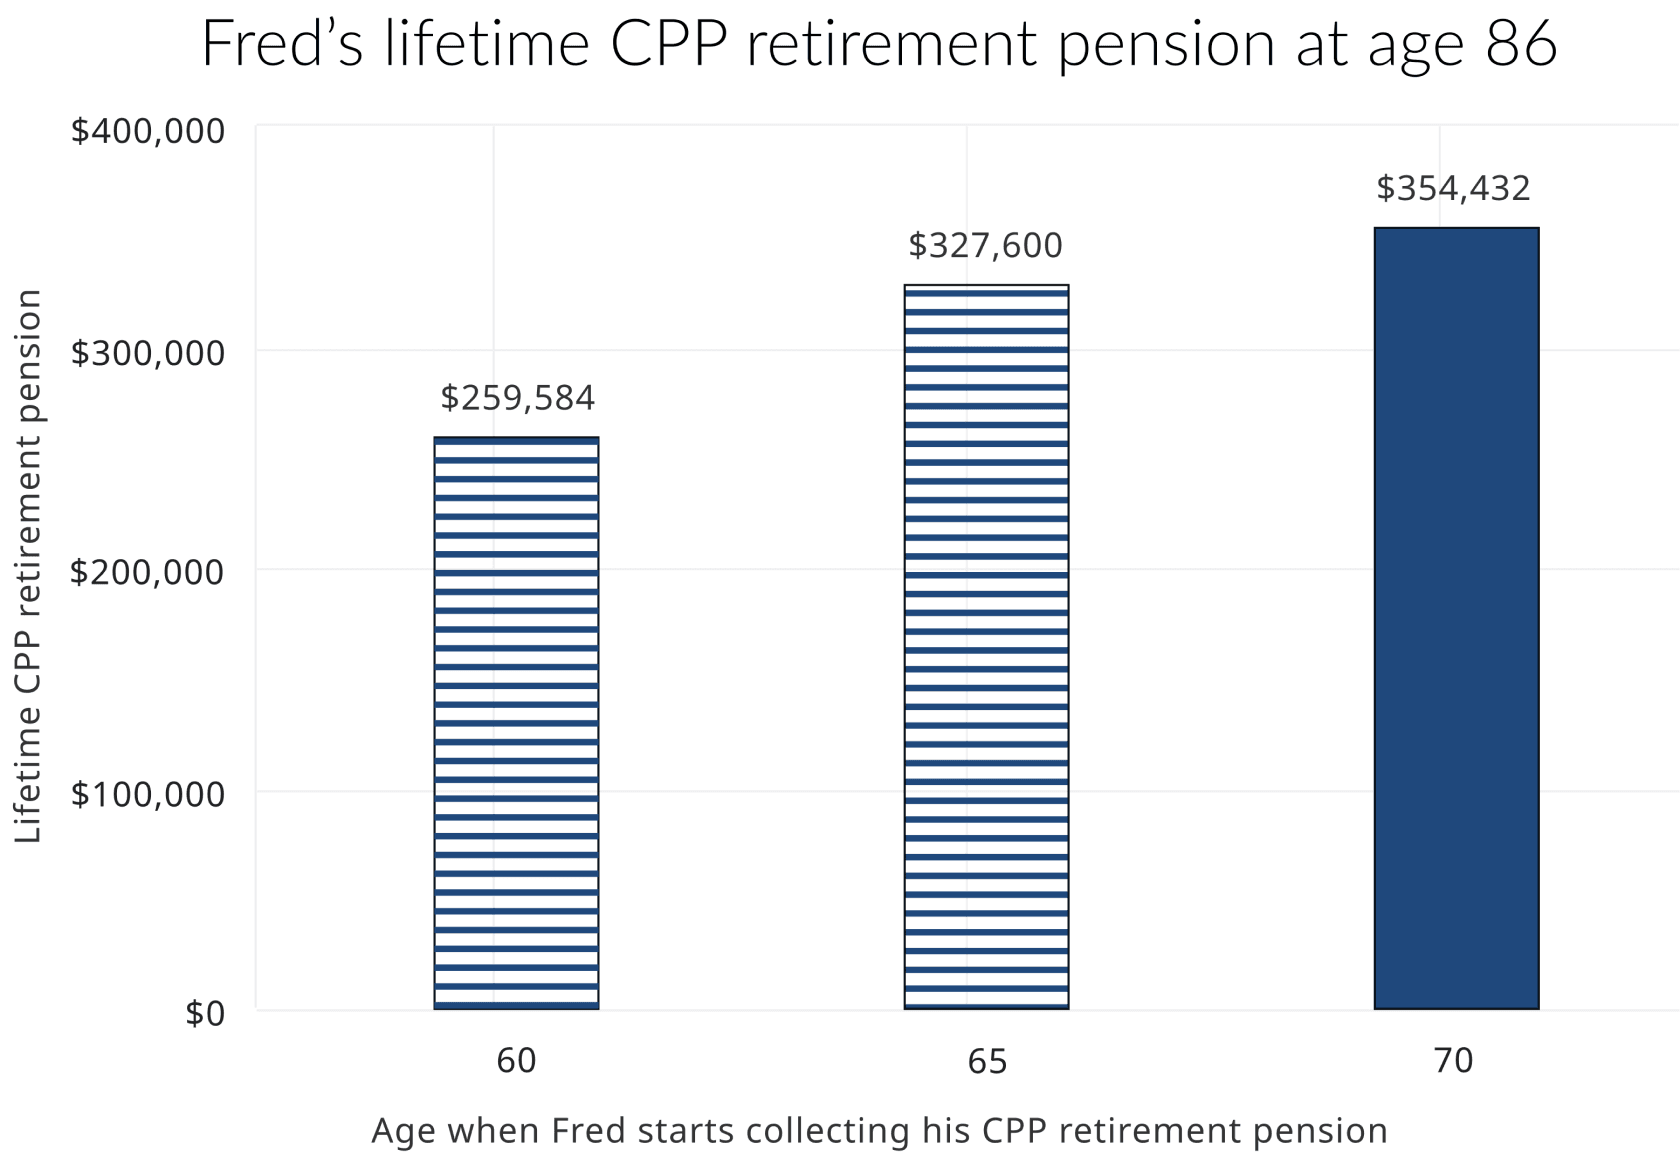 The chart shows changes in Fred's CPP pension lifetime payments depending on what age he starts. It shows that the longer he waits to start his pension, the more money he'll receive for life. He could start his CPP pension at age 60 for the smallest amount, or at age 70 for the largest amount.